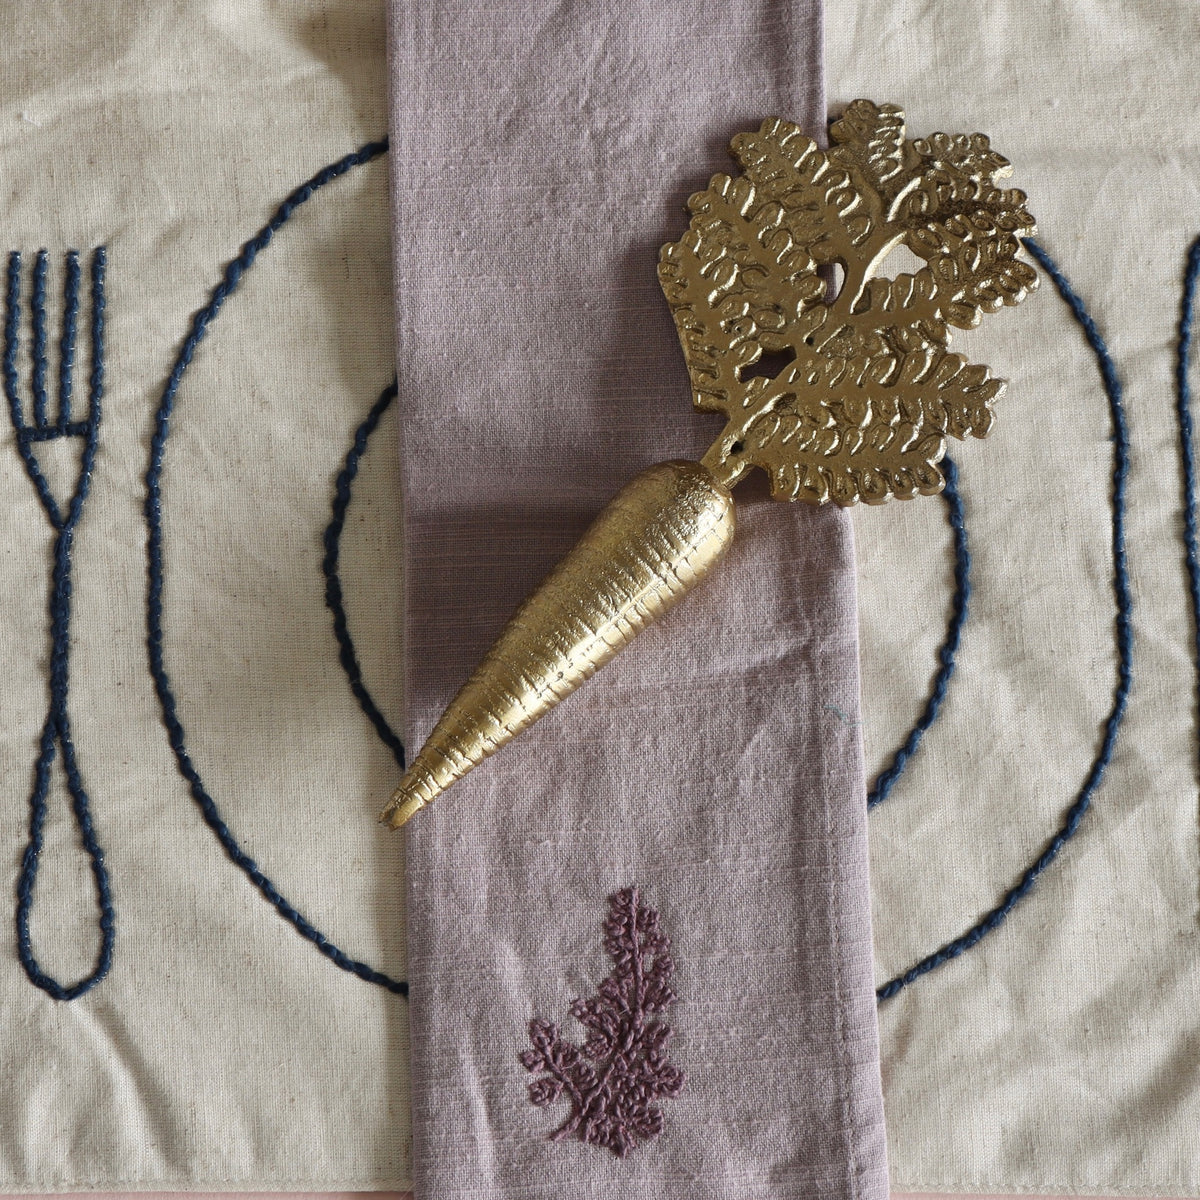 Embroidered Place Setting Linen Placemat - Holistic Habitat 